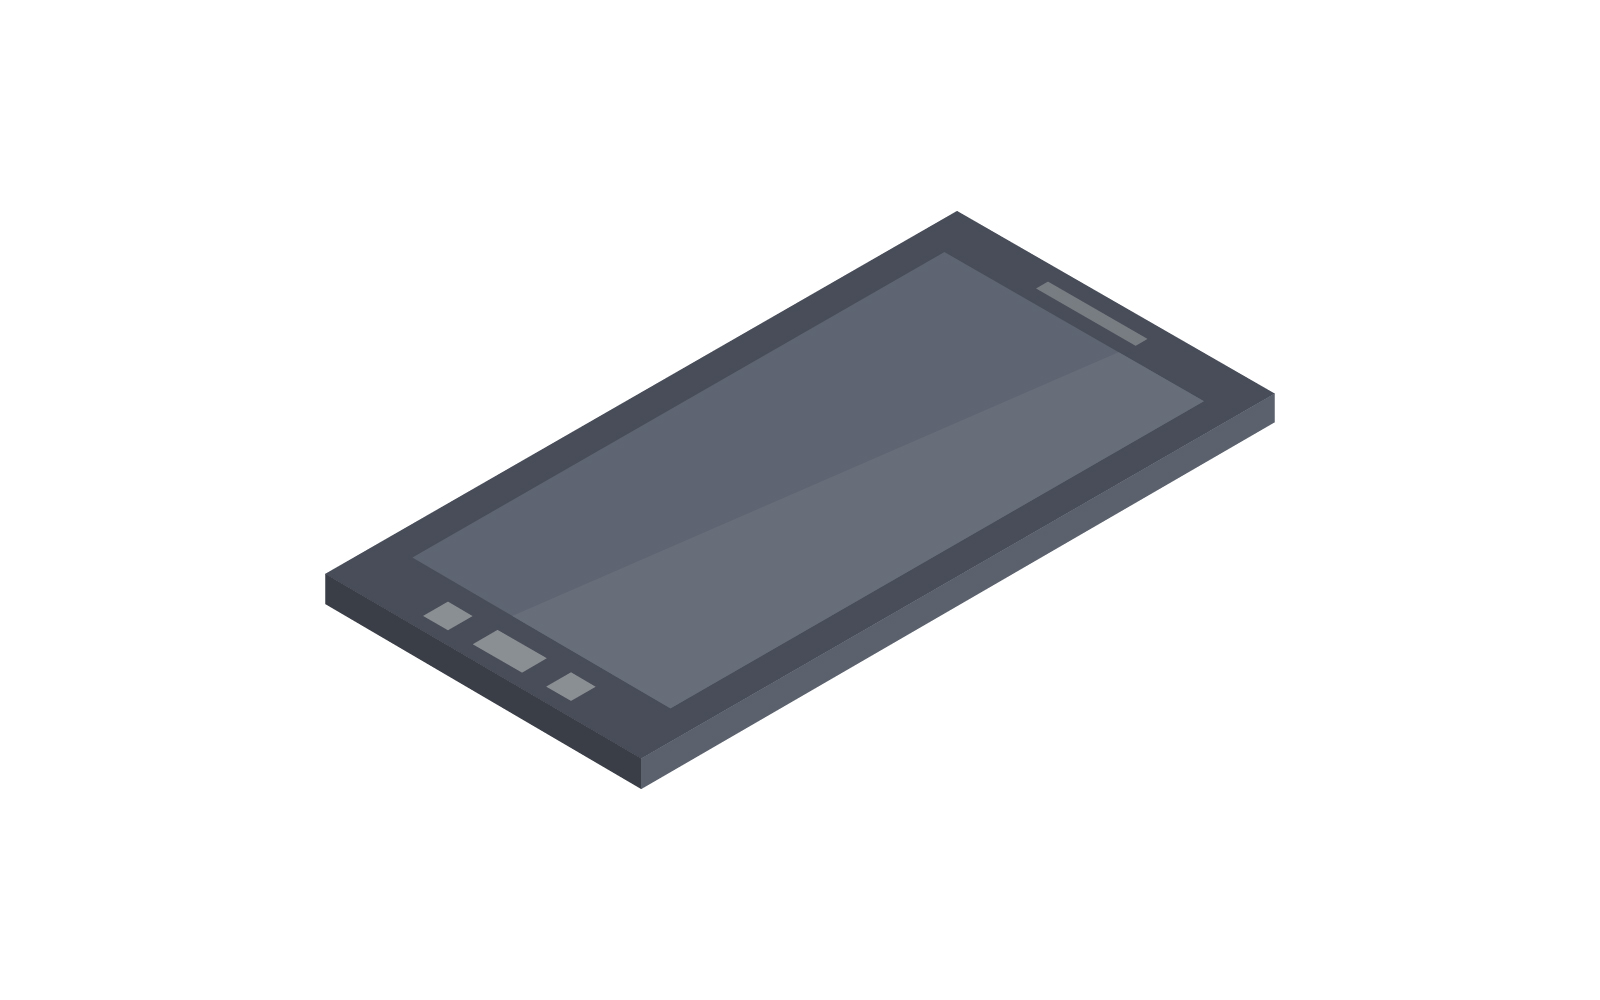 Isometric smartphone illustrated on a white background